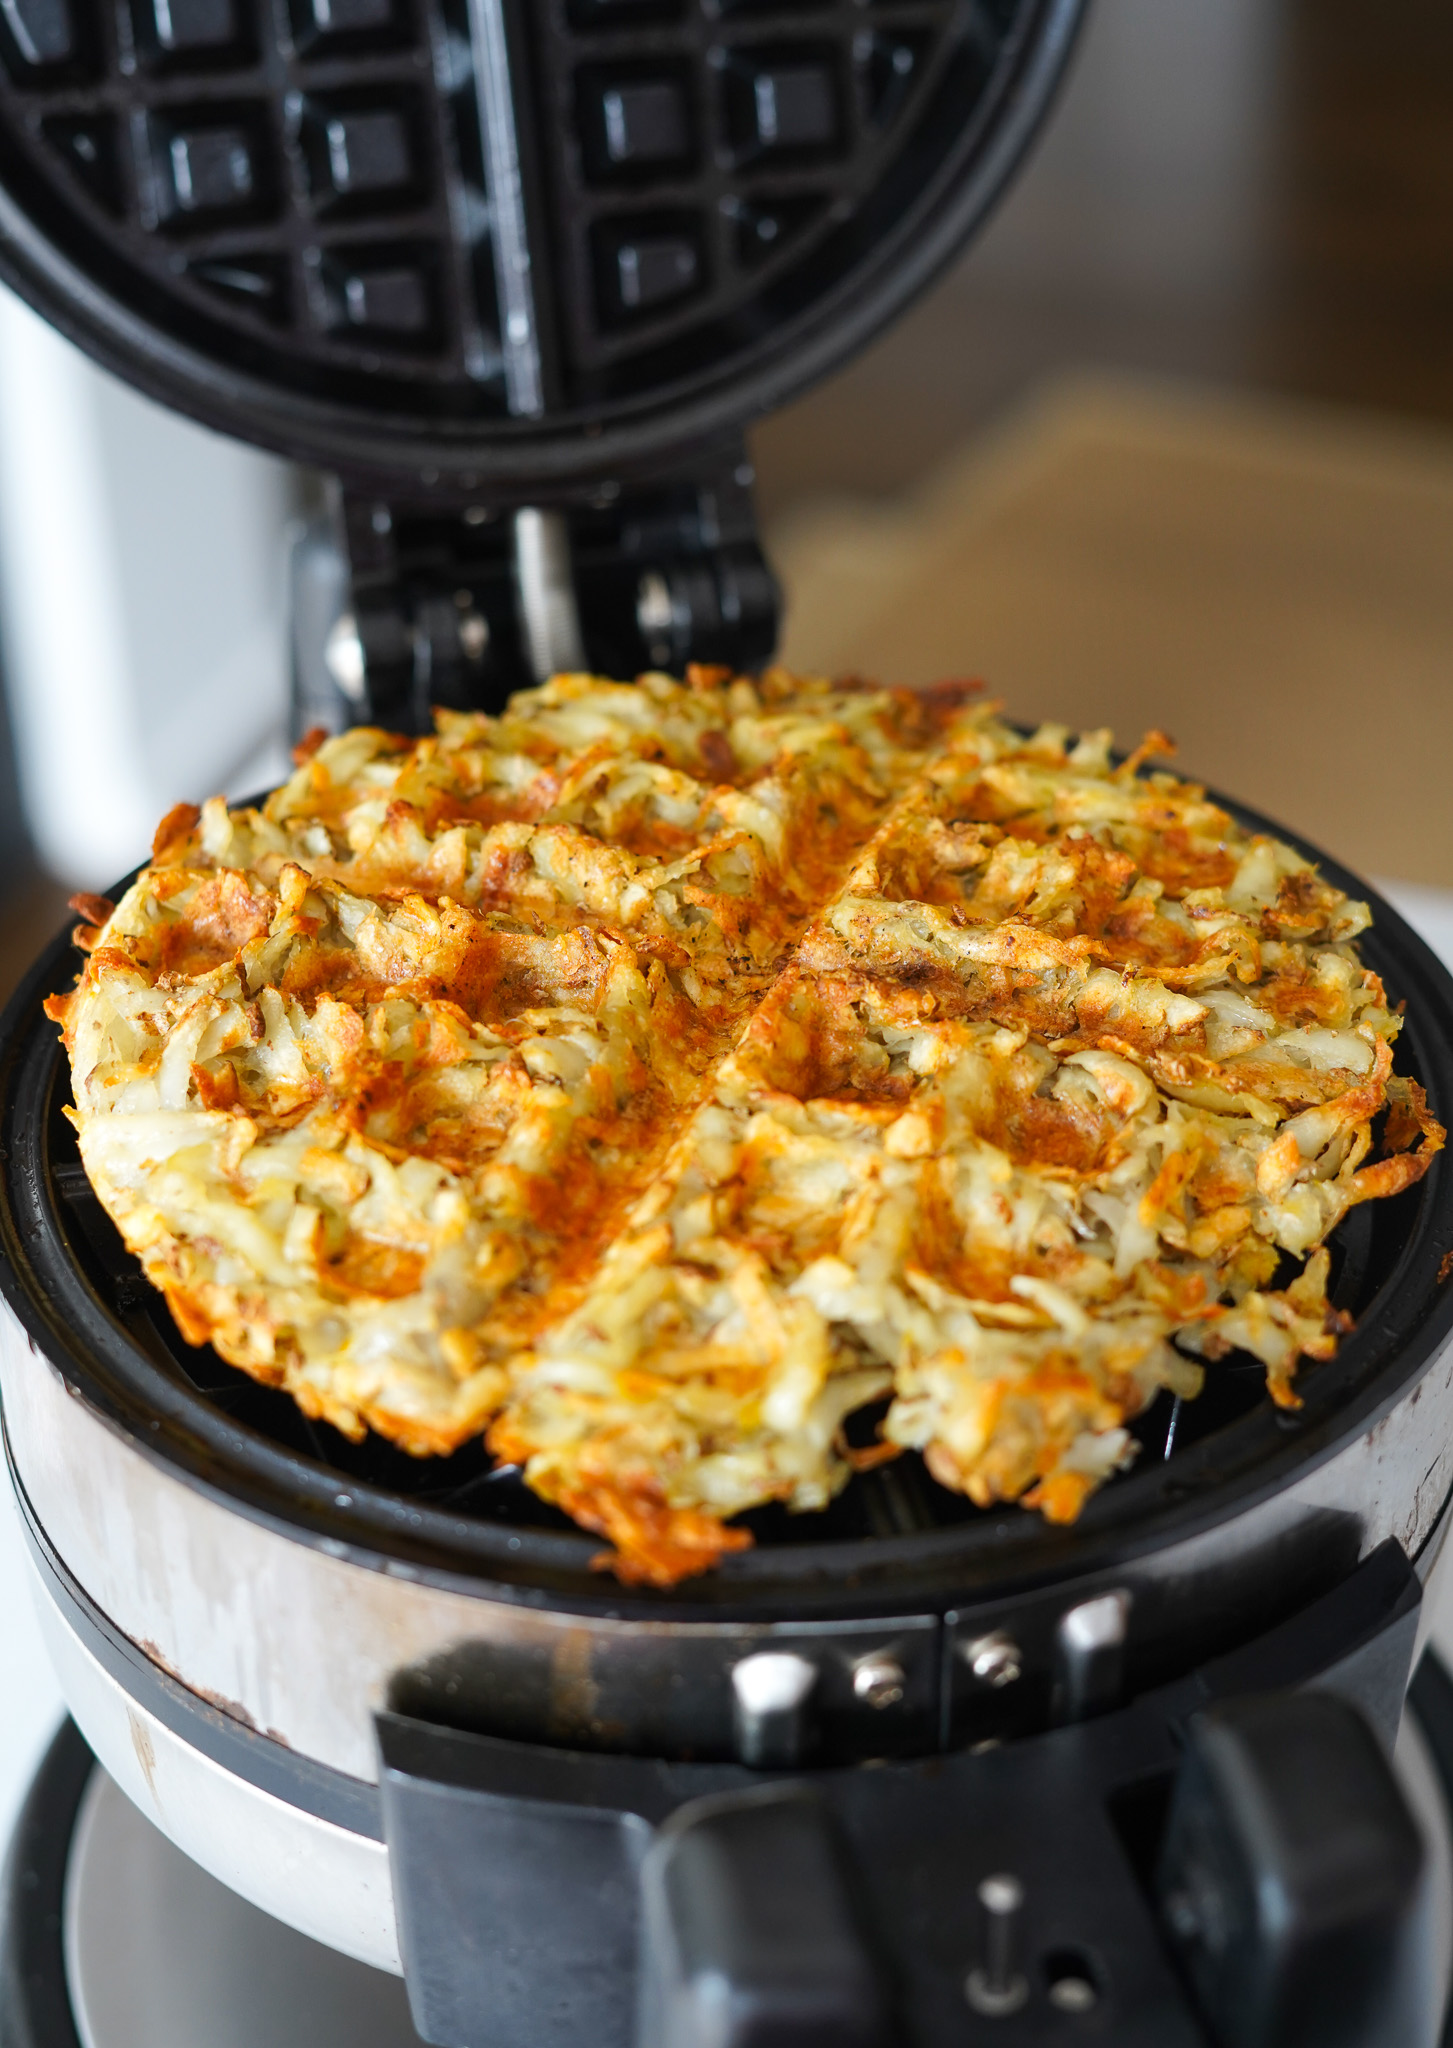 Review: Trying Ina Garten's Hack for Perfect Hash Browns